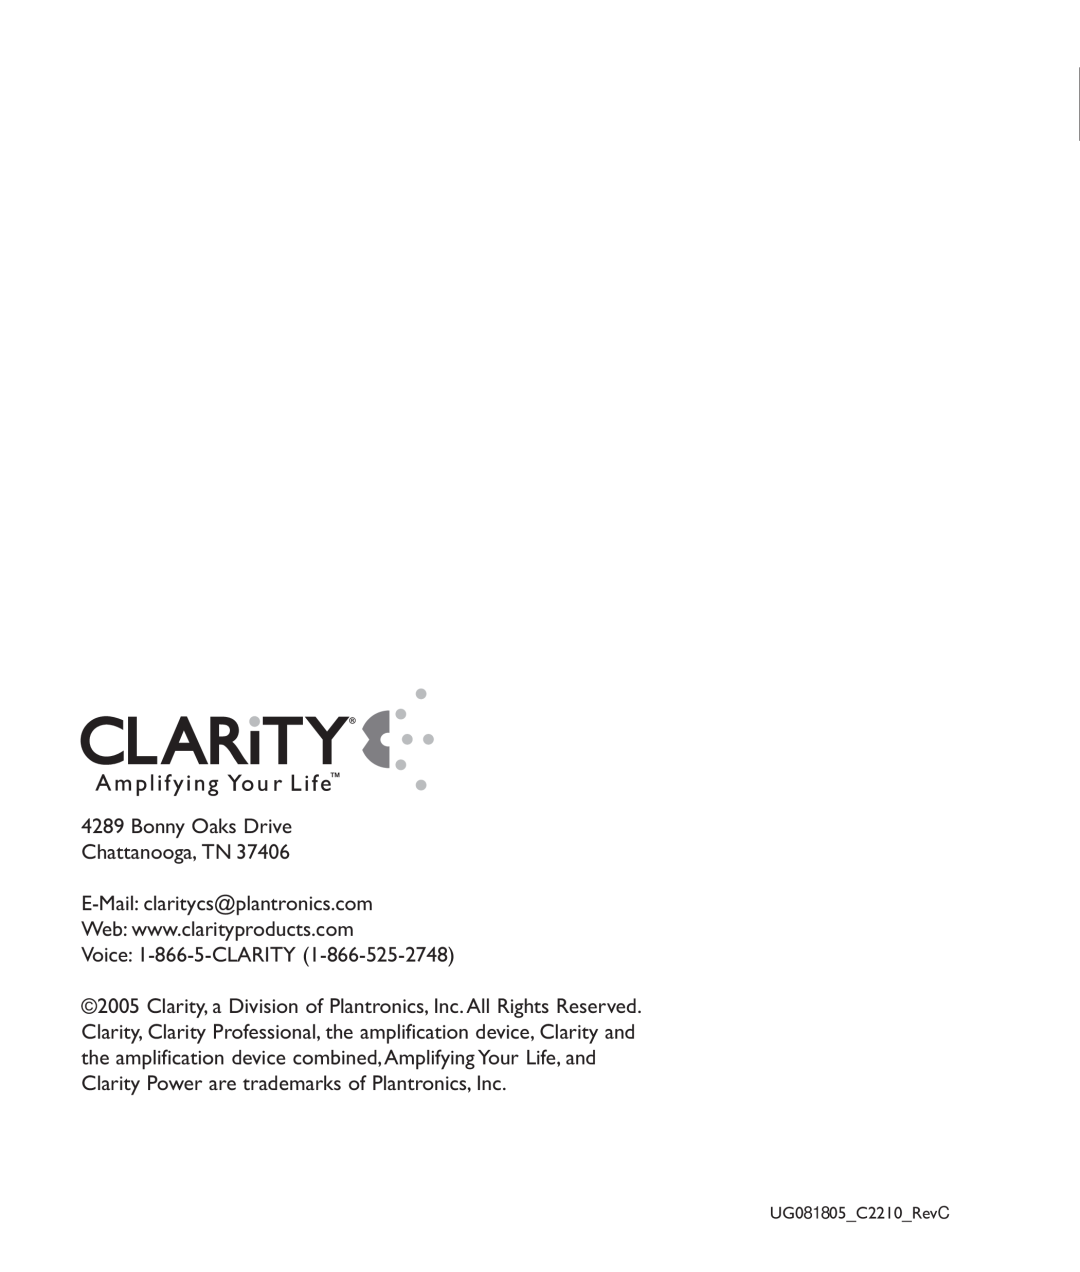 Clarity c2210 quick start English, Federal Communications Commissions Requirements, Warranty and Service, Questions? 